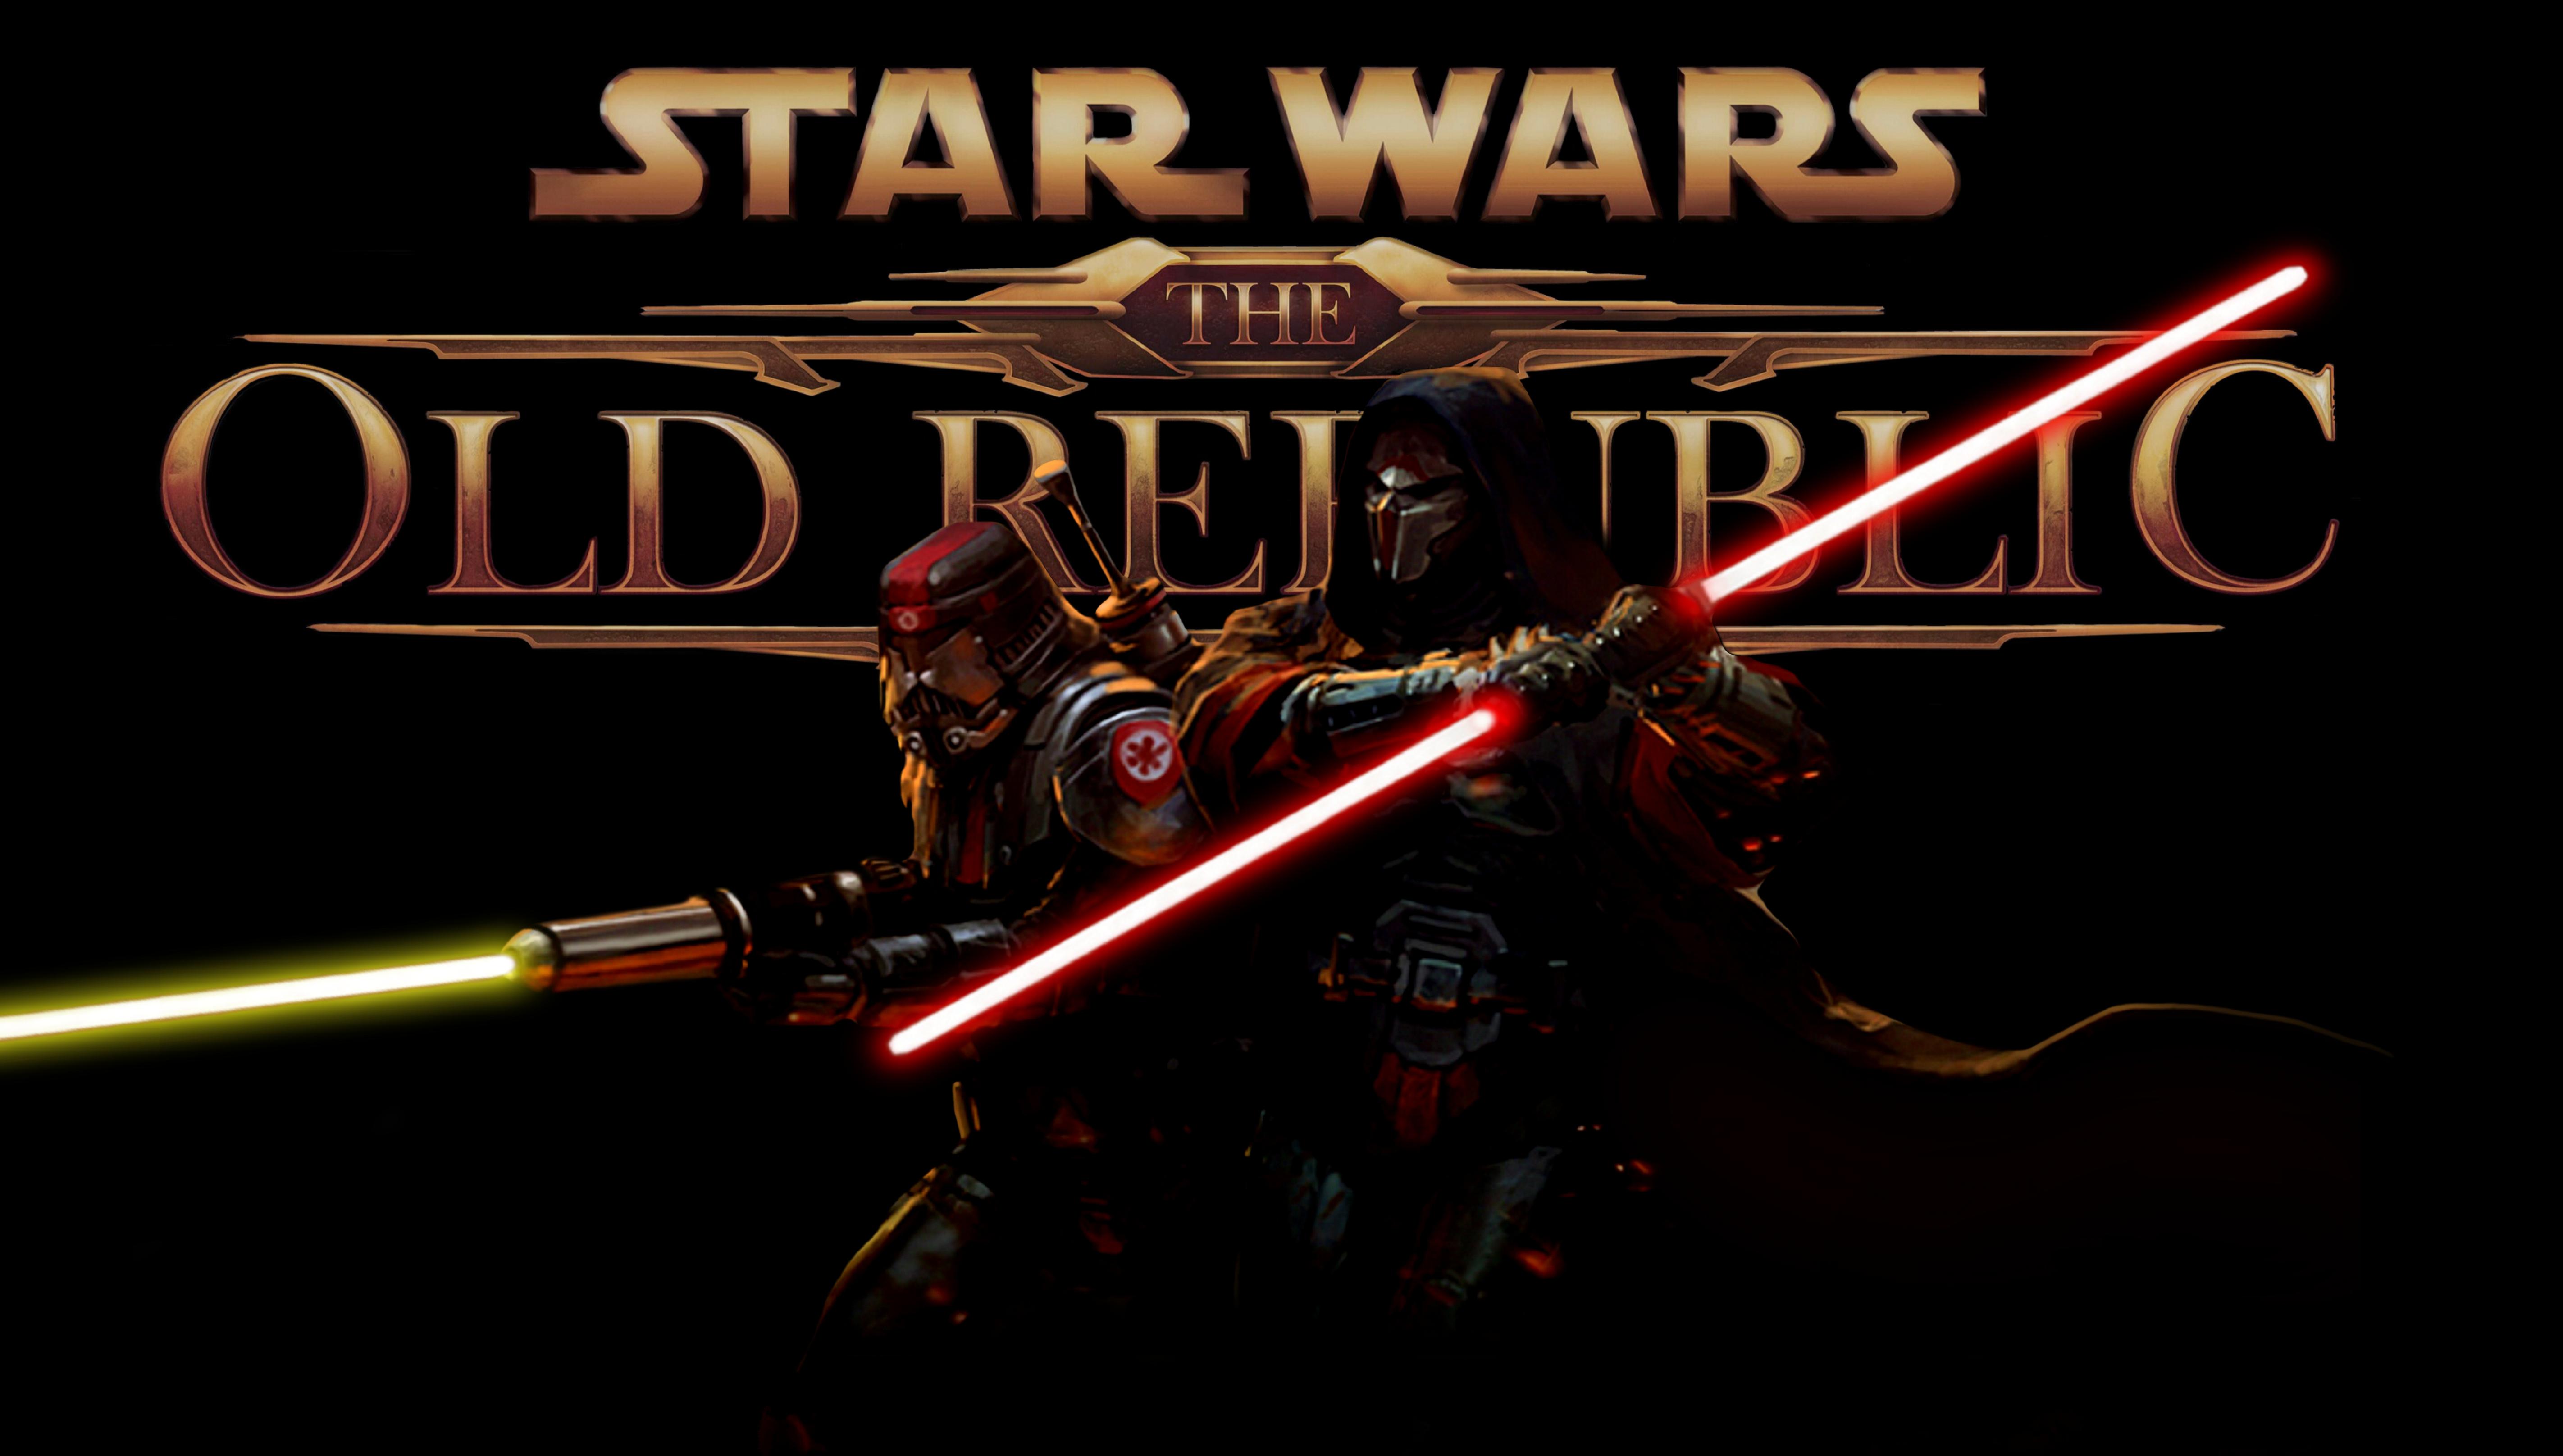 Star Wars The Old Republic Wallpapers, Pictures, Images